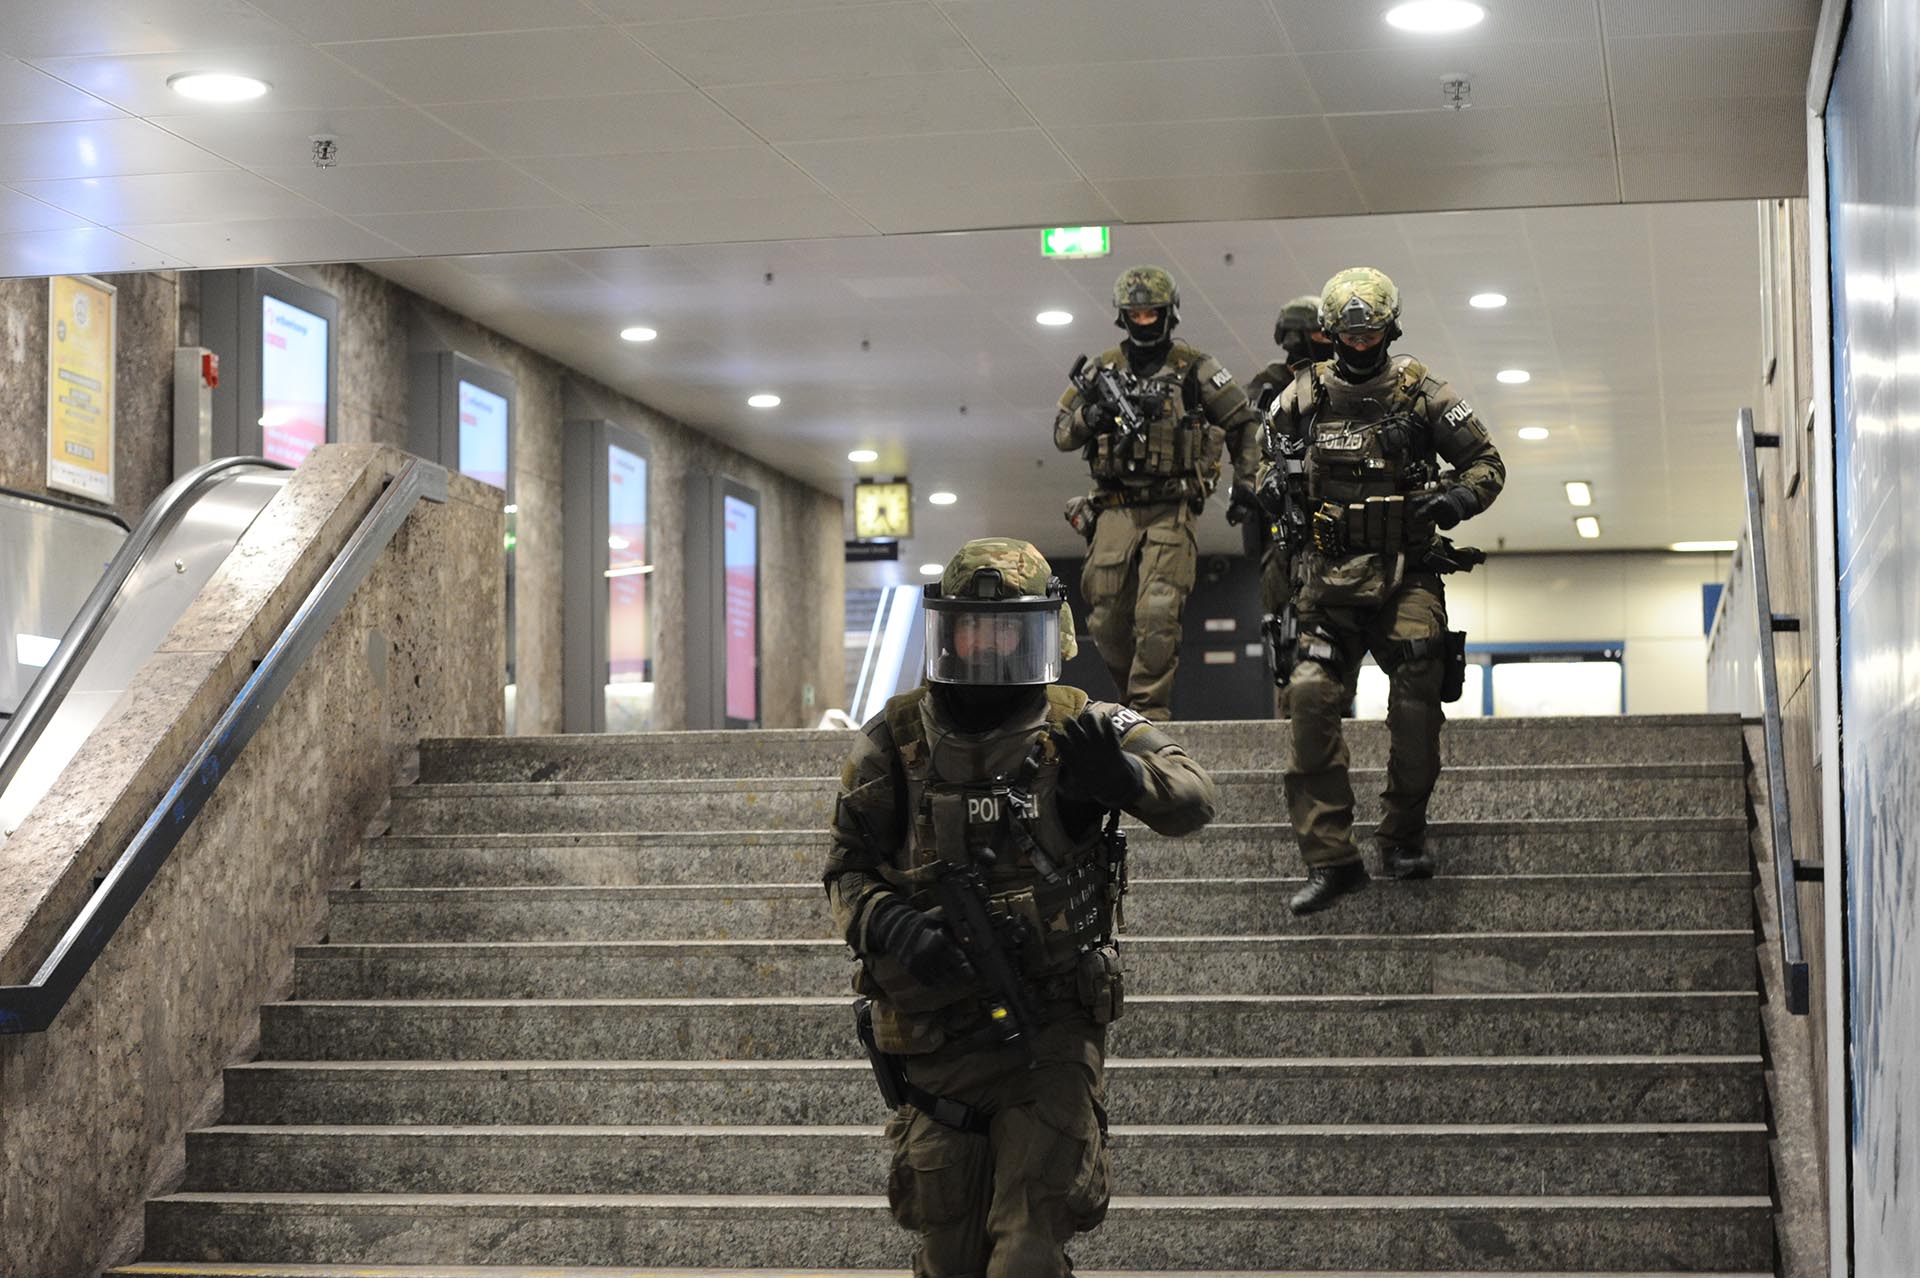 Heavily armed police forces walk through the underground station Karlsplatz (Stachus) after a shooting in the Olympia shopping centre was reported in Munich, southern Germany, Friday, July 22, 2016. (Andreas Gebert/dpa via AP)